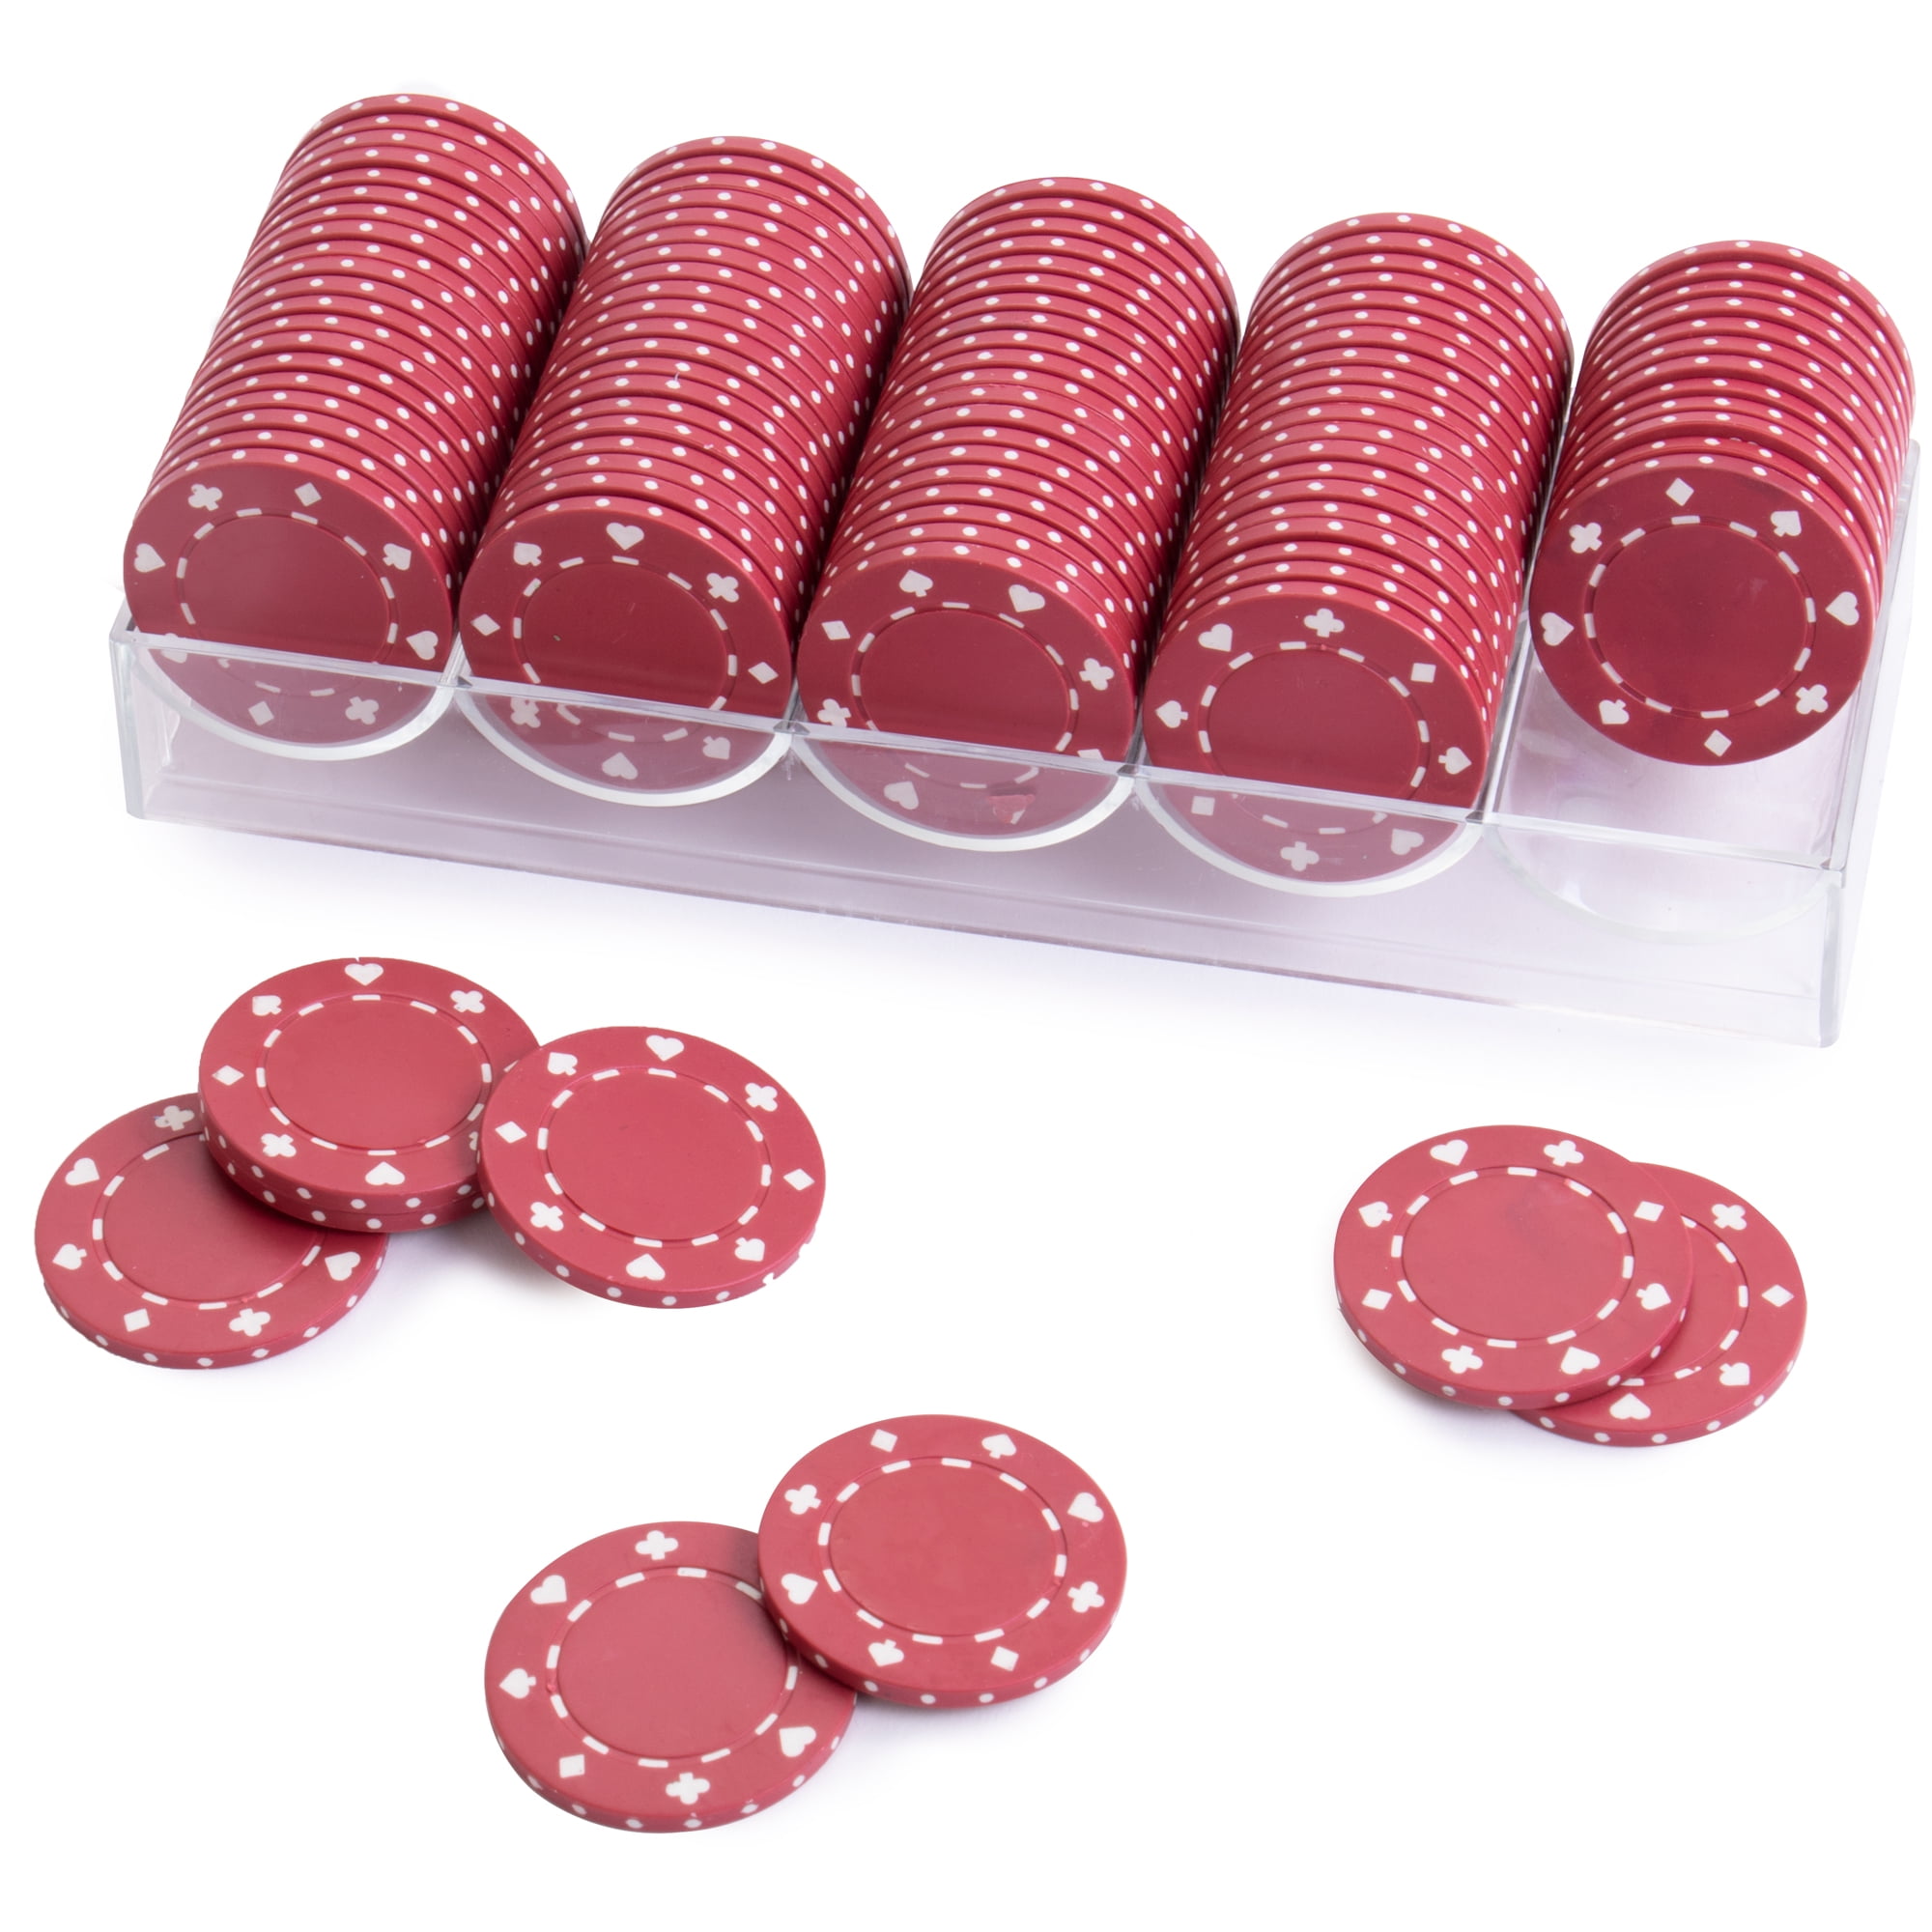 100pc ct RED ~ 11.5 Grams Striped Dice Series Casino Quality Clay Poker Chips 